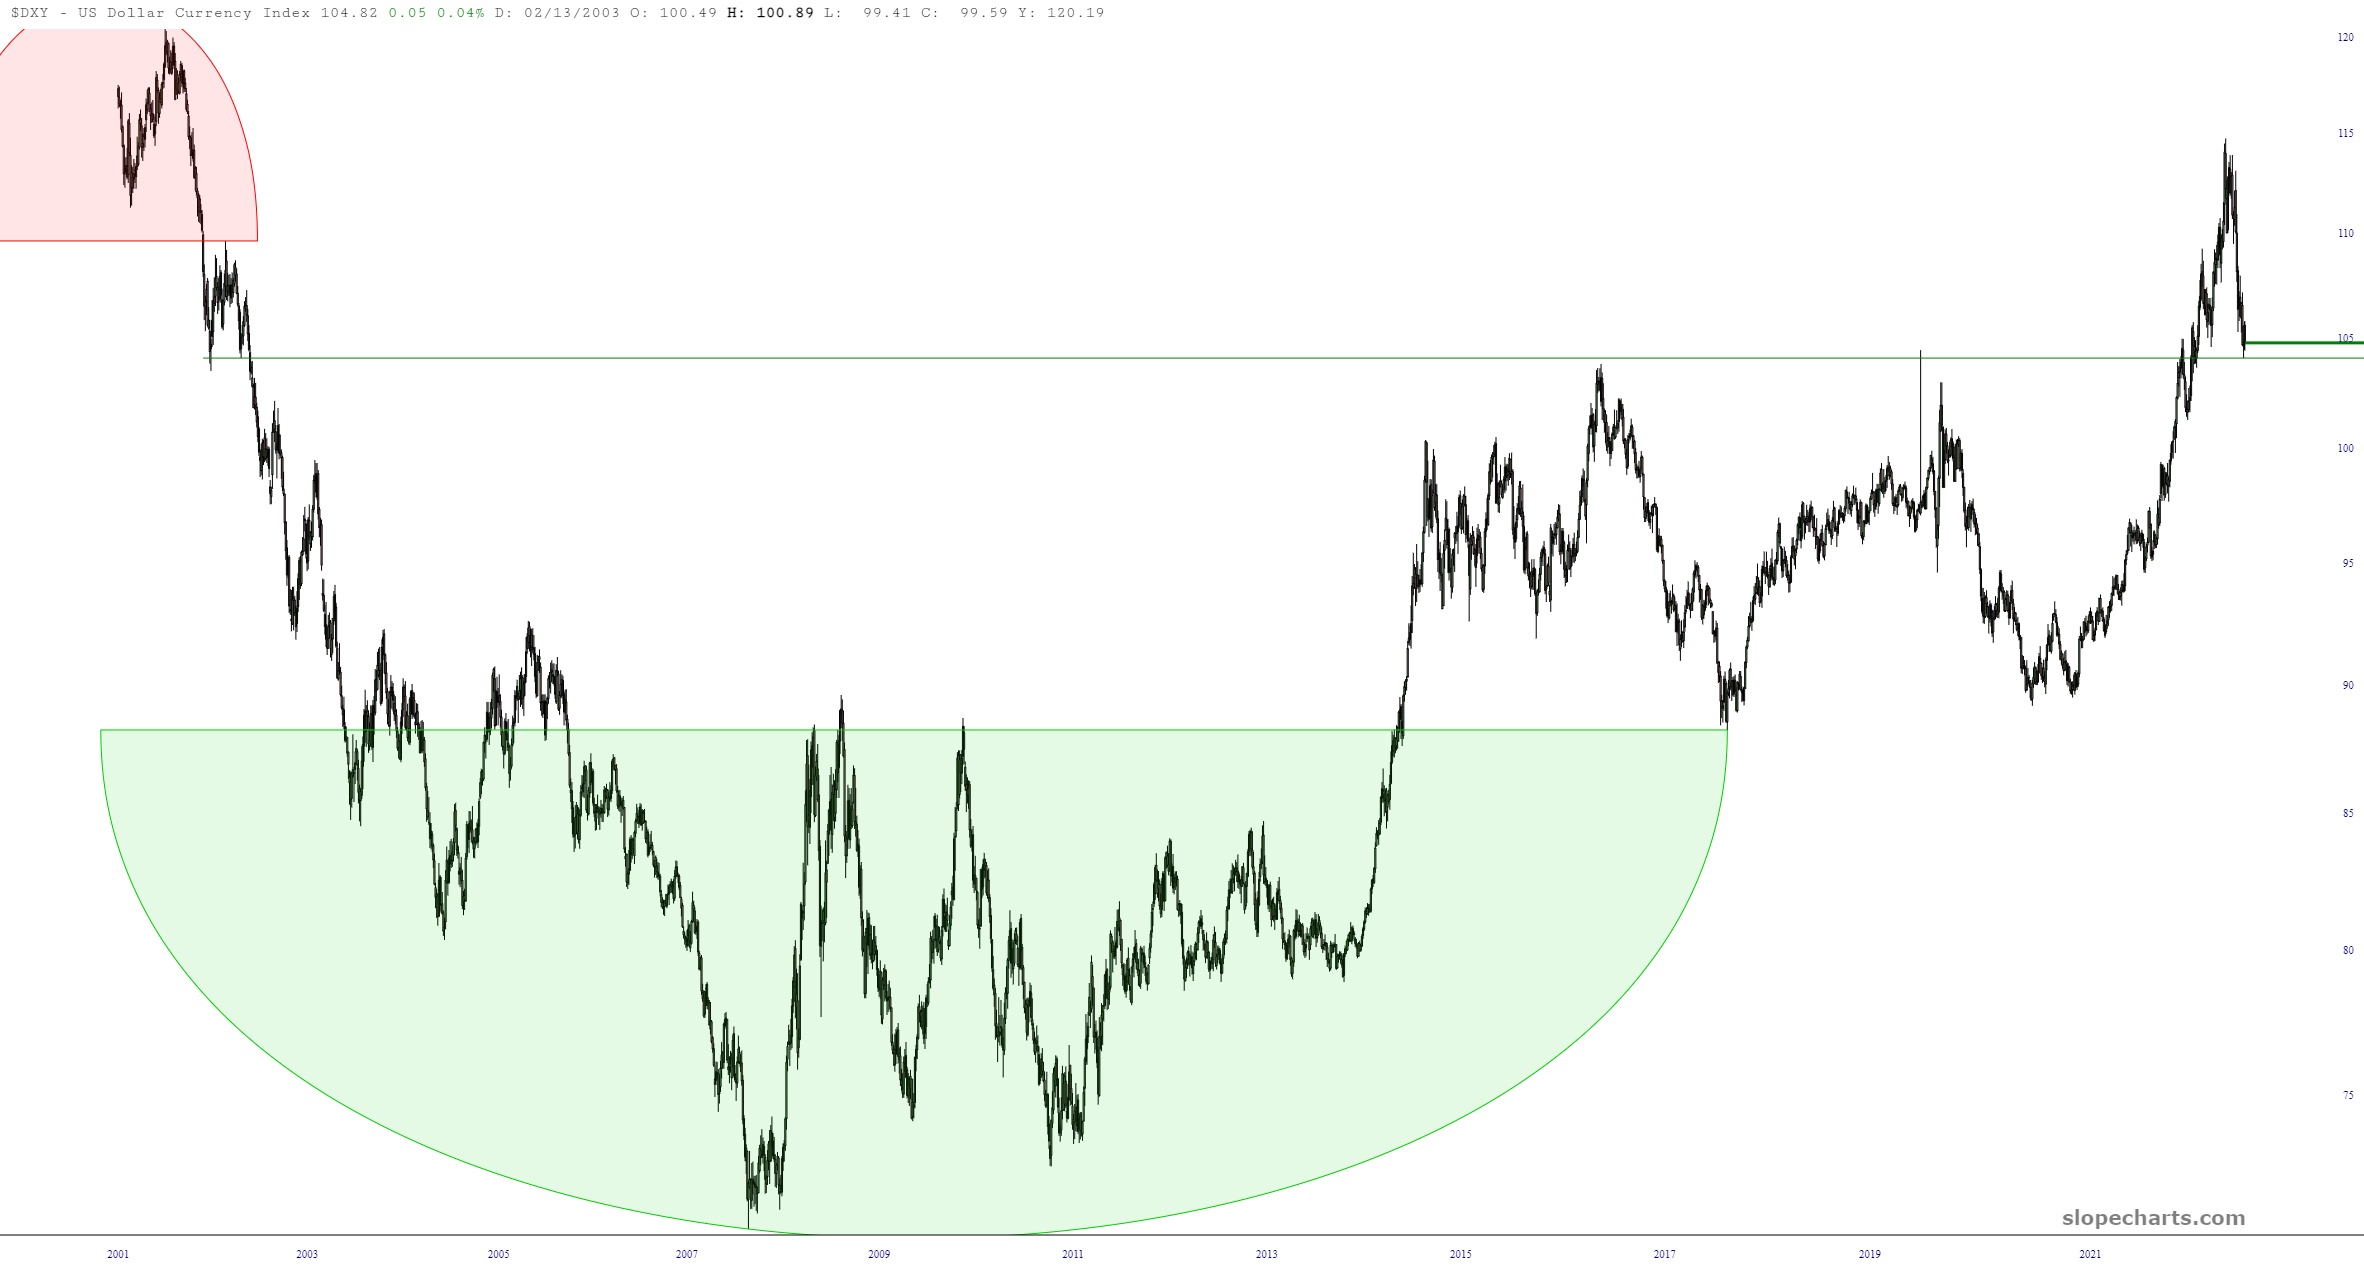 DXY index chart.